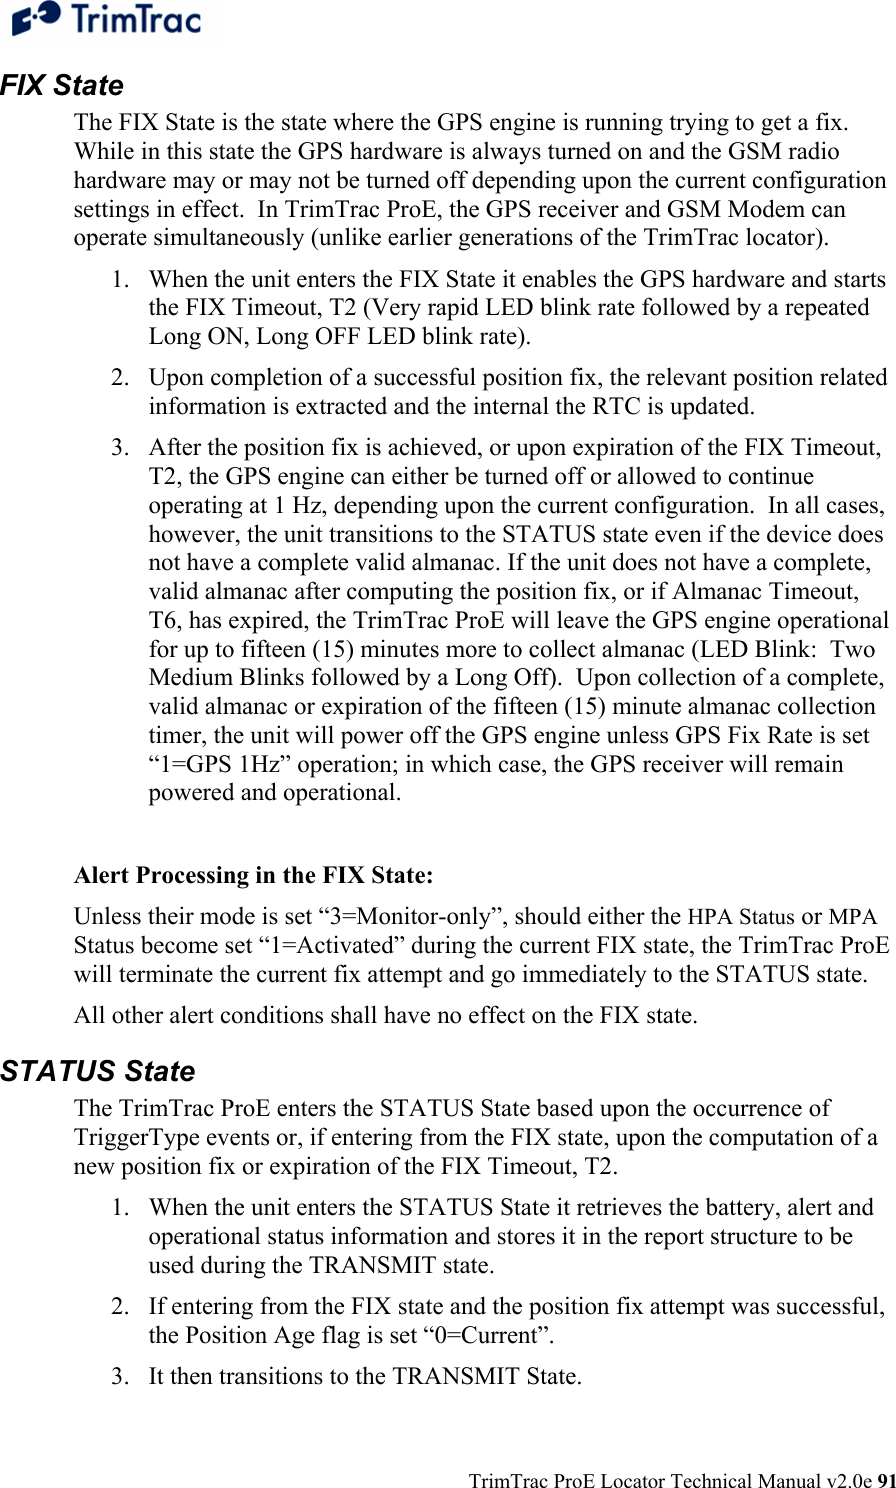  TrimTrac ProE Locator Technical Manual v2.0e 91 FIX State The FIX State is the state where the GPS engine is running trying to get a fix.  While in this state the GPS hardware is always turned on and the GSM radio hardware may or may not be turned off depending upon the current configuration settings in effect.  In TrimTrac ProE, the GPS receiver and GSM Modem can operate simultaneously (unlike earlier generations of the TrimTrac locator). 1. When the unit enters the FIX State it enables the GPS hardware and starts the FIX Timeout, T2 (Very rapid LED blink rate followed by a repeated Long ON, Long OFF LED blink rate). 2. Upon completion of a successful position fix, the relevant position related information is extracted and the internal the RTC is updated. 3. After the position fix is achieved, or upon expiration of the FIX Timeout, T2, the GPS engine can either be turned off or allowed to continue operating at 1 Hz, depending upon the current configuration.  In all cases, however, the unit transitions to the STATUS state even if the device does not have a complete valid almanac. If the unit does not have a complete, valid almanac after computing the position fix, or if Almanac Timeout, T6, has expired, the TrimTrac ProE will leave the GPS engine operational for up to fifteen (15) minutes more to collect almanac (LED Blink:  Two Medium Blinks followed by a Long Off).  Upon collection of a complete, valid almanac or expiration of the fifteen (15) minute almanac collection timer, the unit will power off the GPS engine unless GPS Fix Rate is set “1=GPS 1Hz” operation; in which case, the GPS receiver will remain powered and operational.  Alert Processing in the FIX State: Unless their mode is set “3=Monitor-only”, should either the HPA Status or MPA Status become set “1=Activated” during the current FIX state, the TrimTrac ProE will terminate the current fix attempt and go immediately to the STATUS state. All other alert conditions shall have no effect on the FIX state. STATUS State The TrimTrac ProE enters the STATUS State based upon the occurrence of TriggerType events or, if entering from the FIX state, upon the computation of a new position fix or expiration of the FIX Timeout, T2. 1. When the unit enters the STATUS State it retrieves the battery, alert and operational status information and stores it in the report structure to be used during the TRANSMIT state.   2. If entering from the FIX state and the position fix attempt was successful, the Position Age flag is set “0=Current”. 3. It then transitions to the TRANSMIT State. 